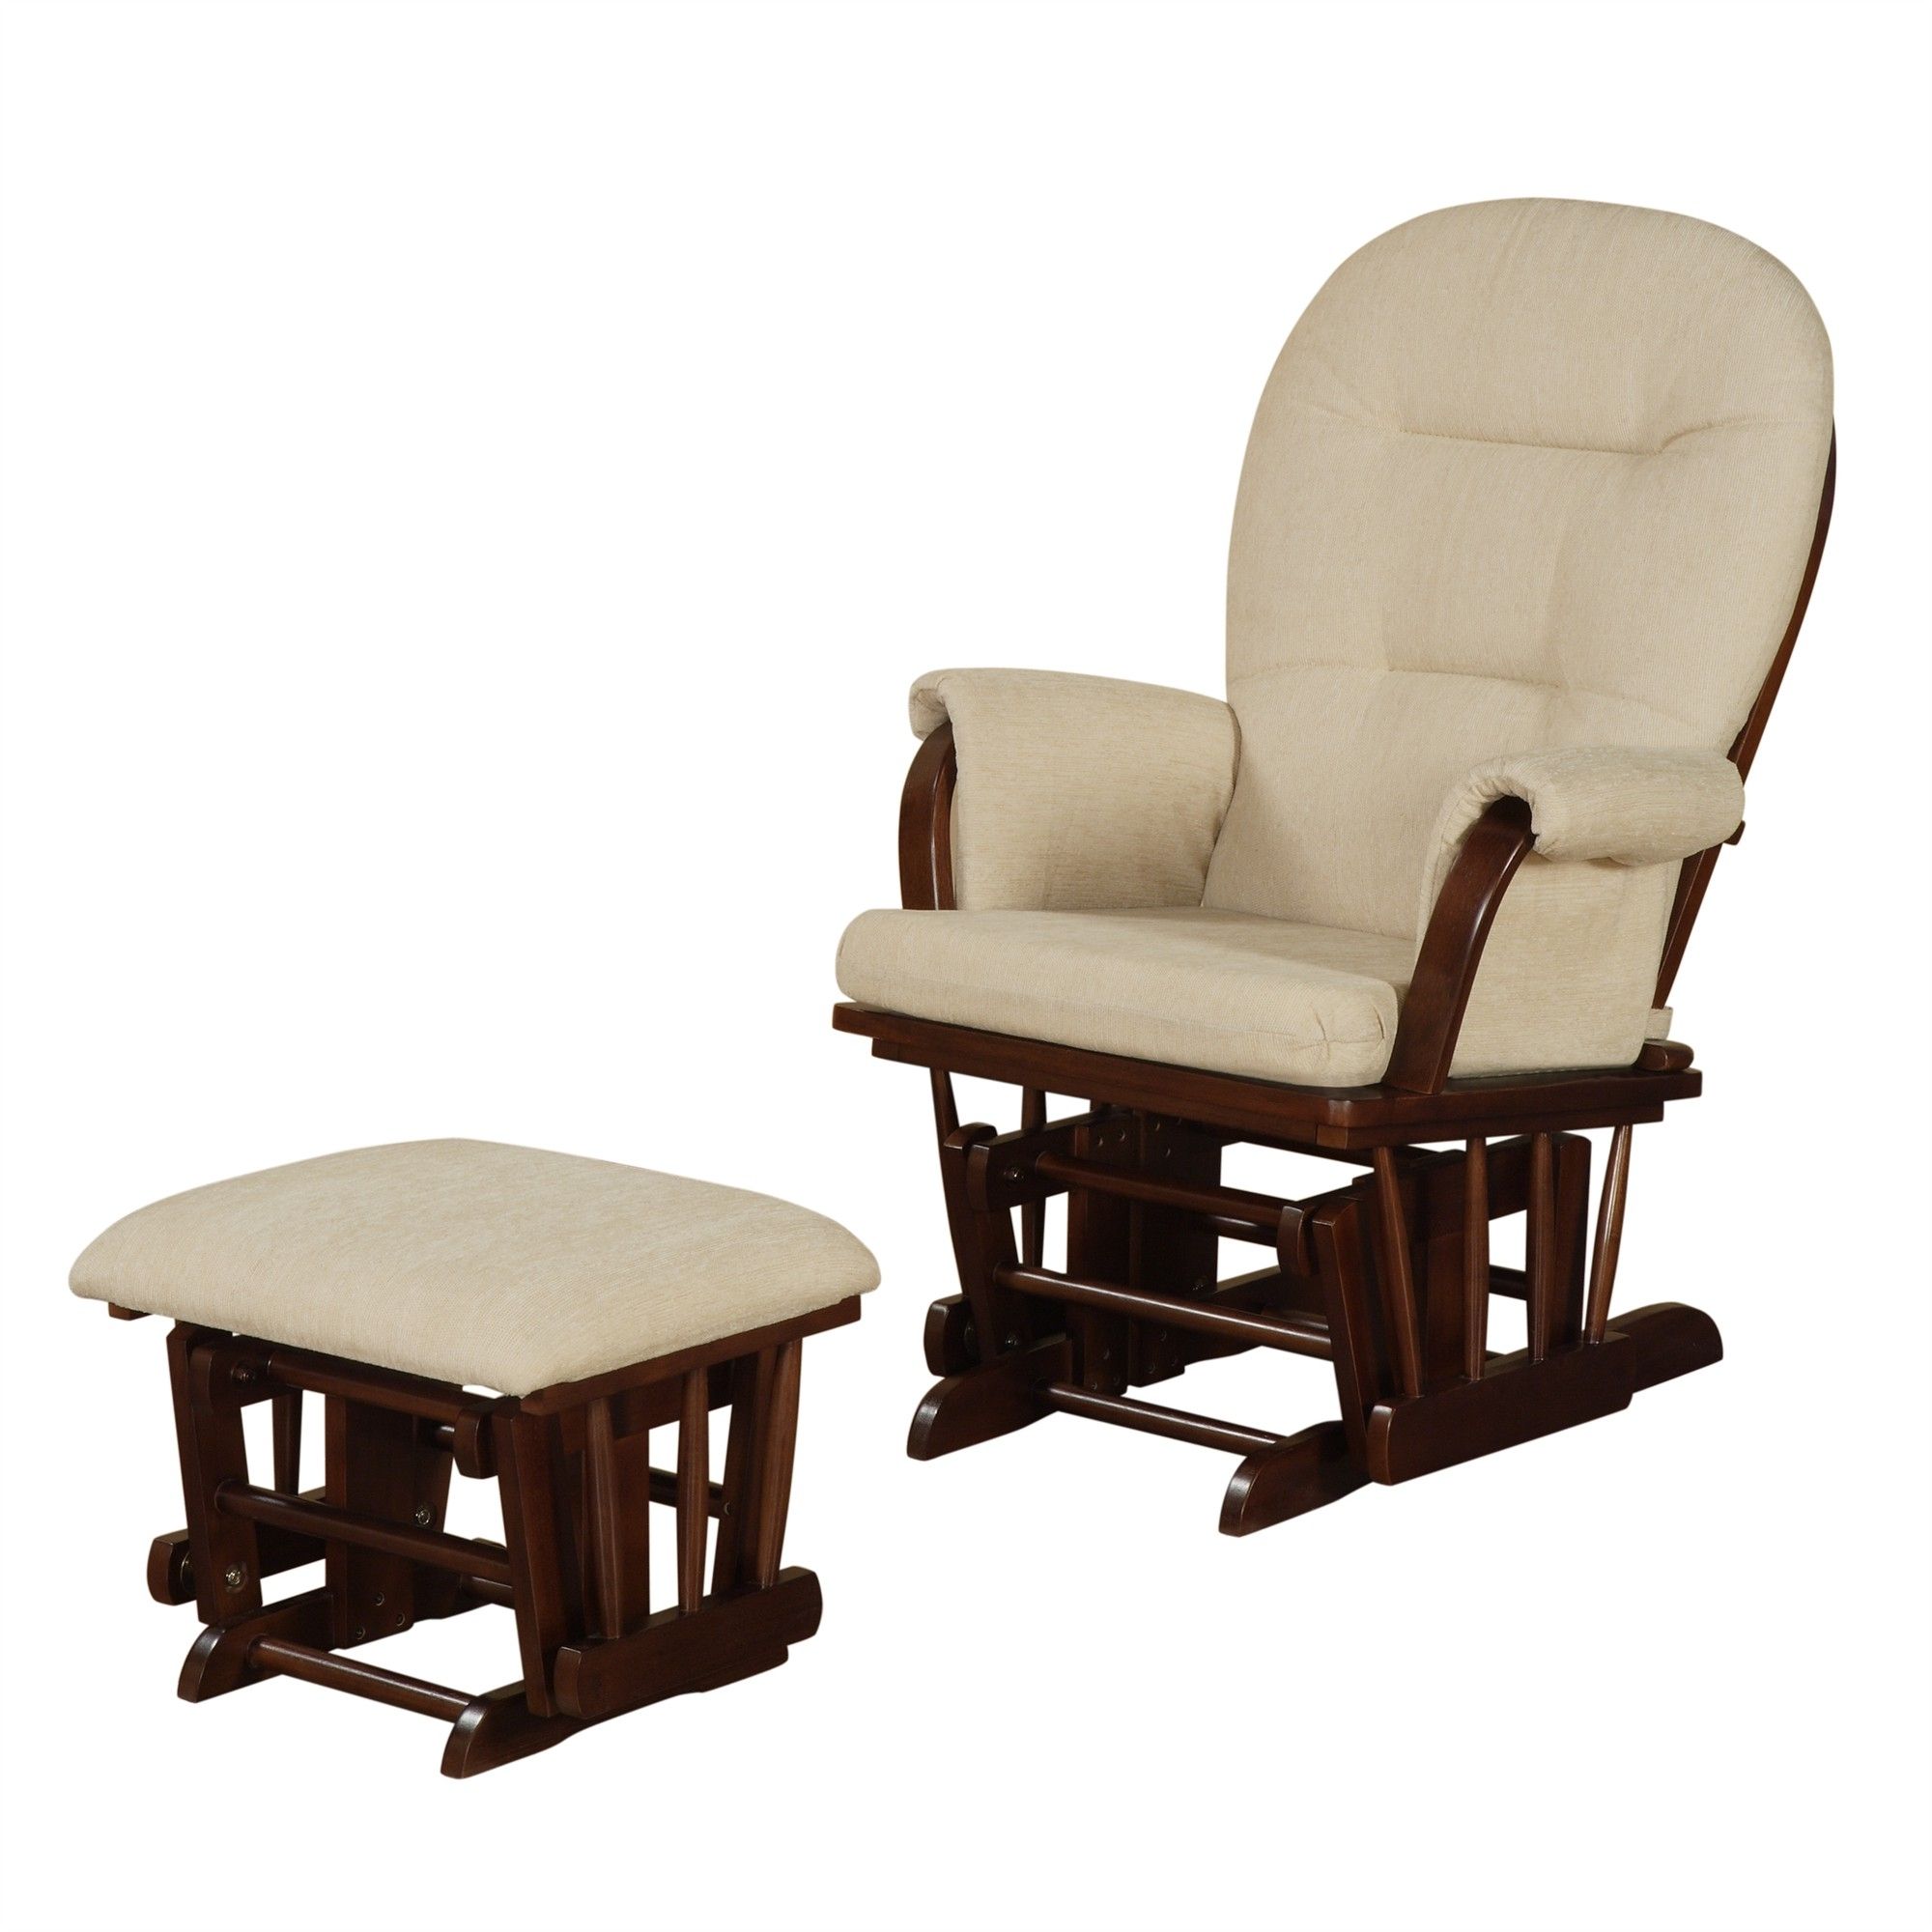 Patio Rocking Chairs With Ottoman Throughout Best And Newest Outdoor Folding Rocking Chair – Kevinjohnsonformayor (View 11 of 20)